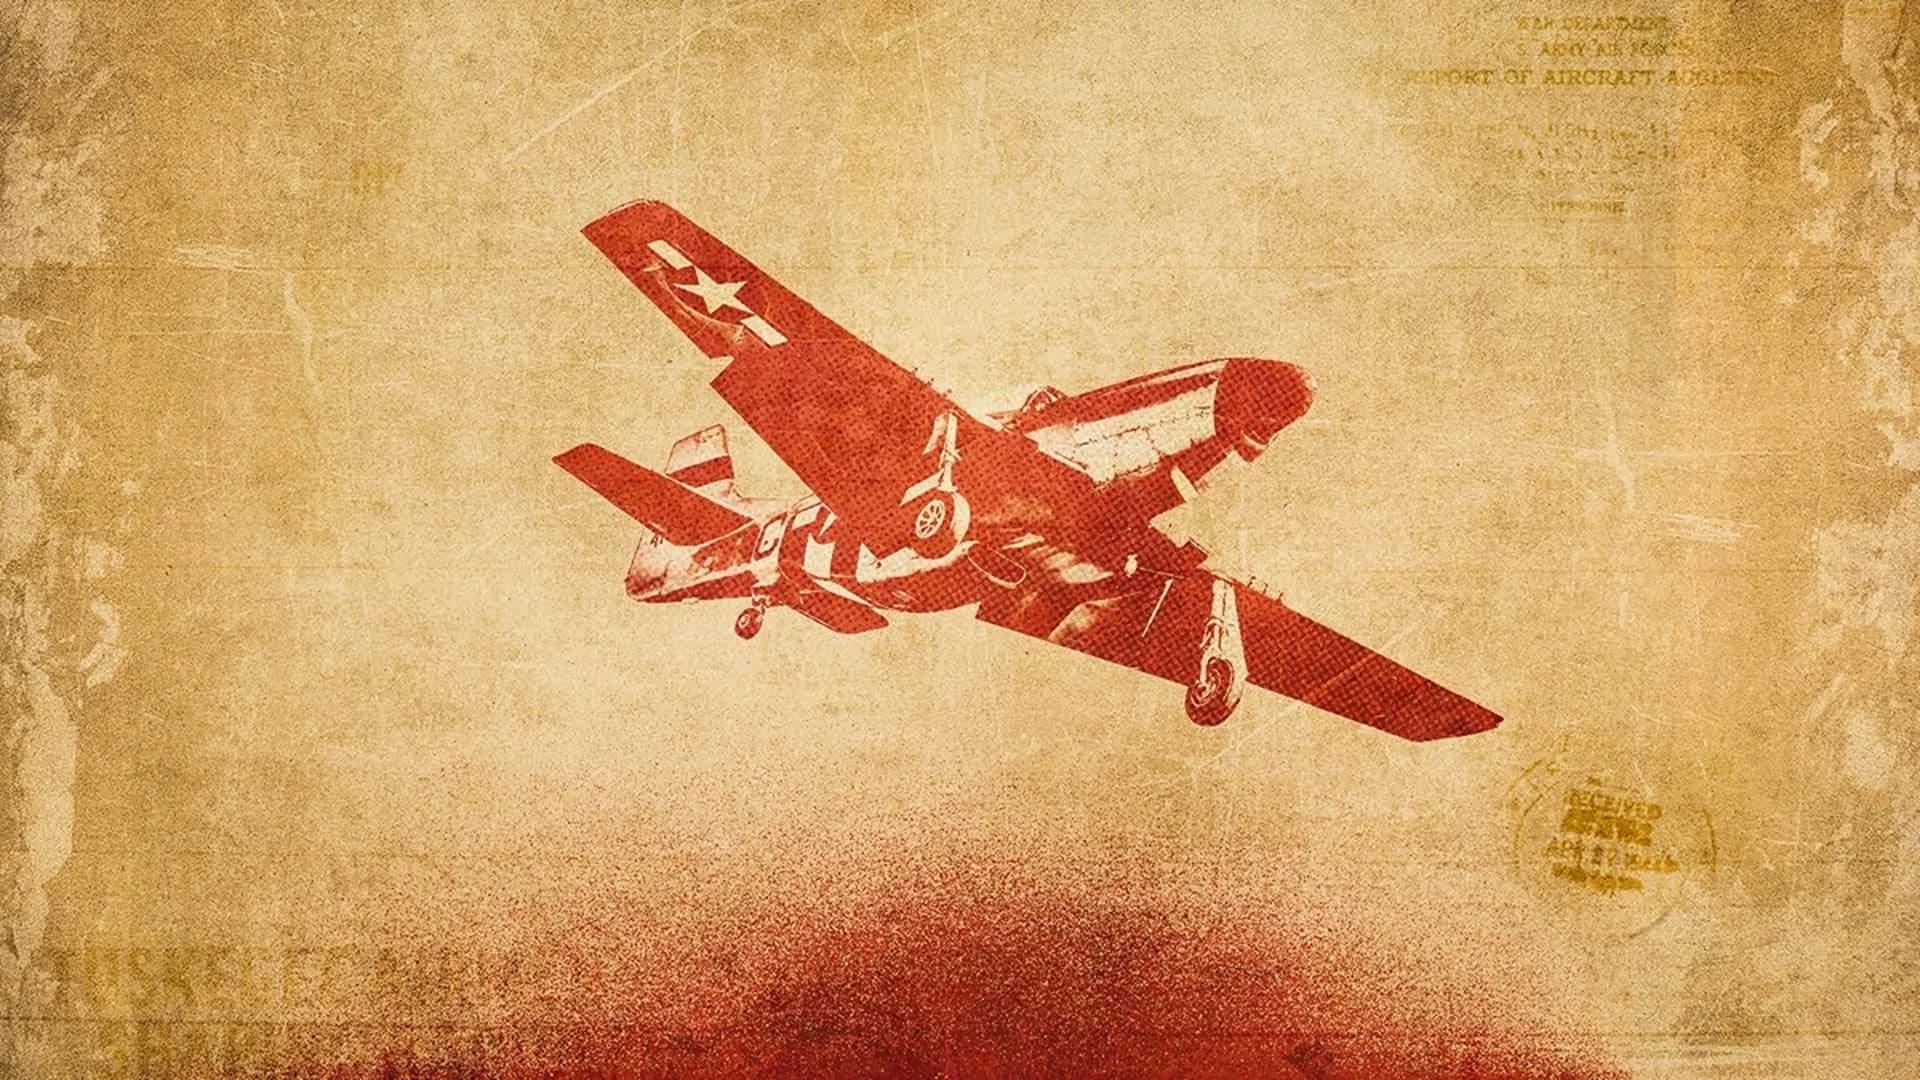 The Real Red Tails backdrop